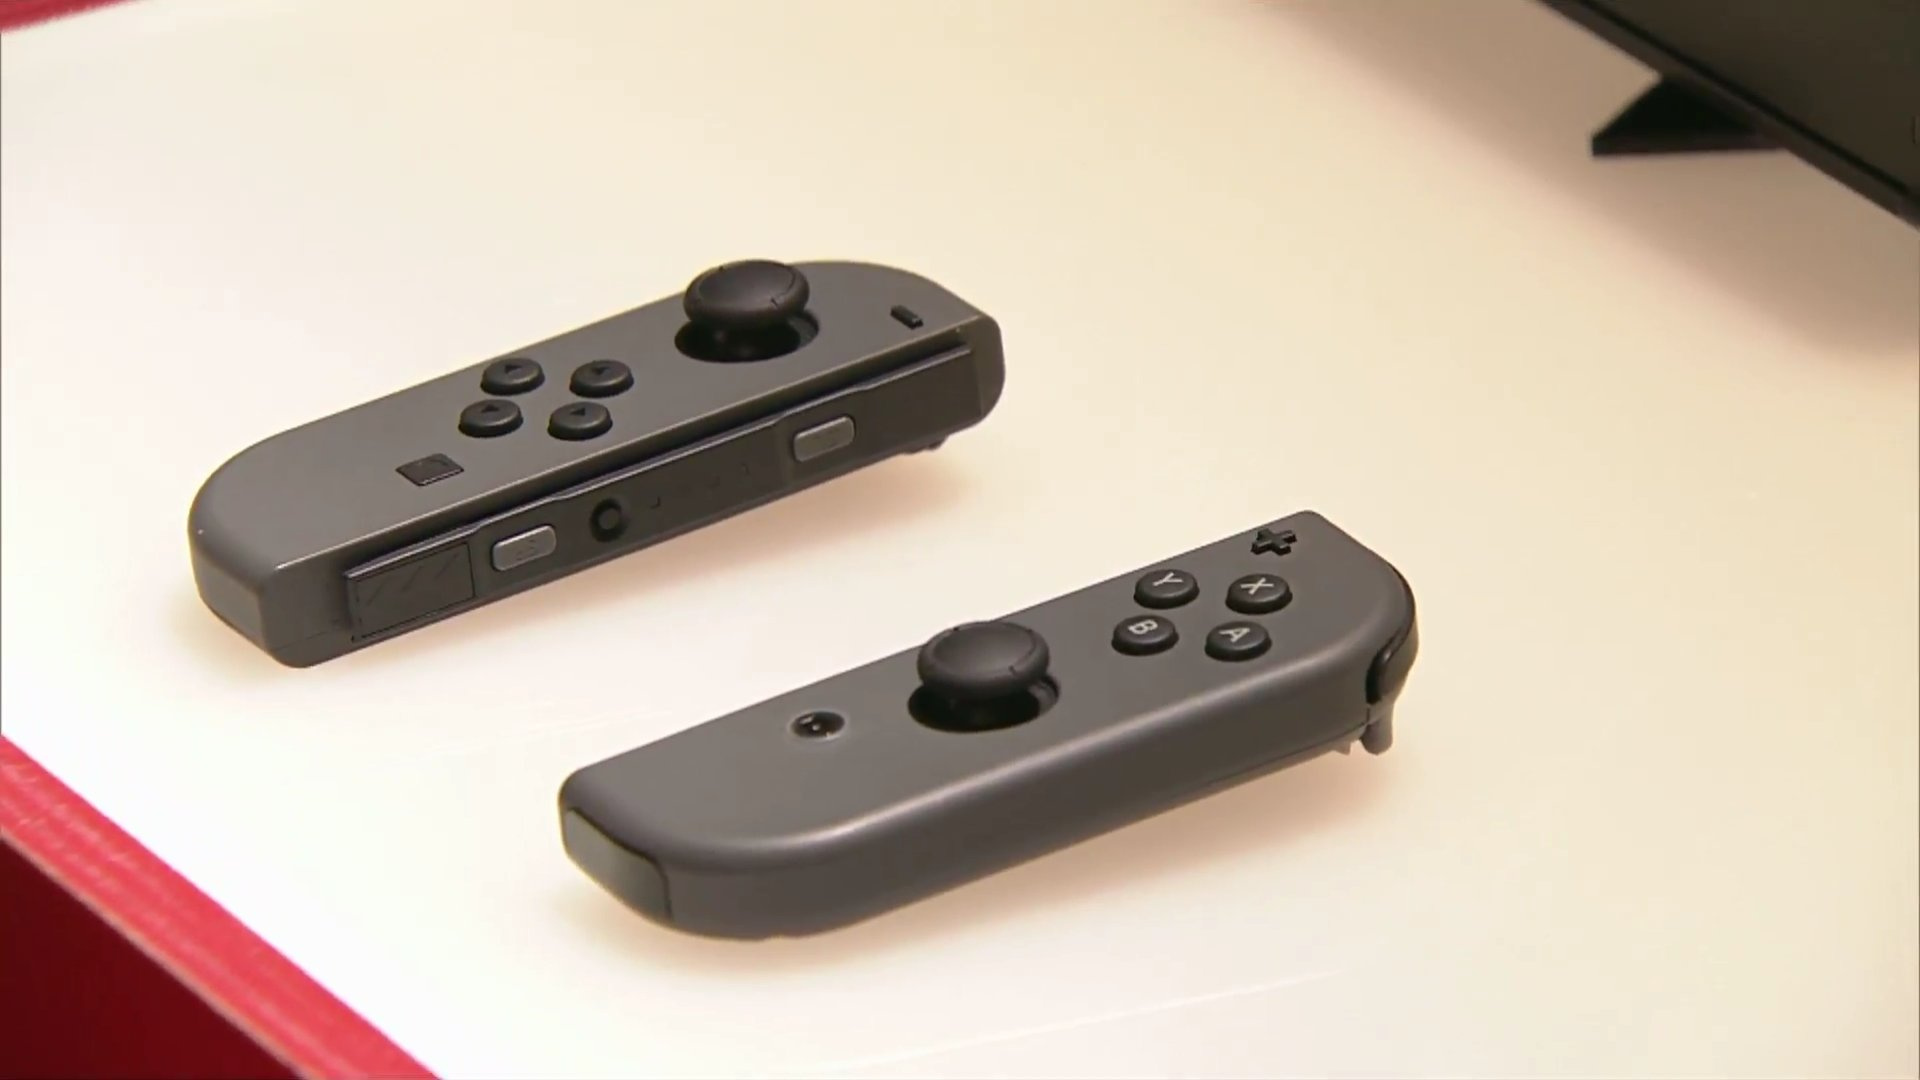 Don't be fooled: Nintendo Switch doesn't come with the Joy-Con